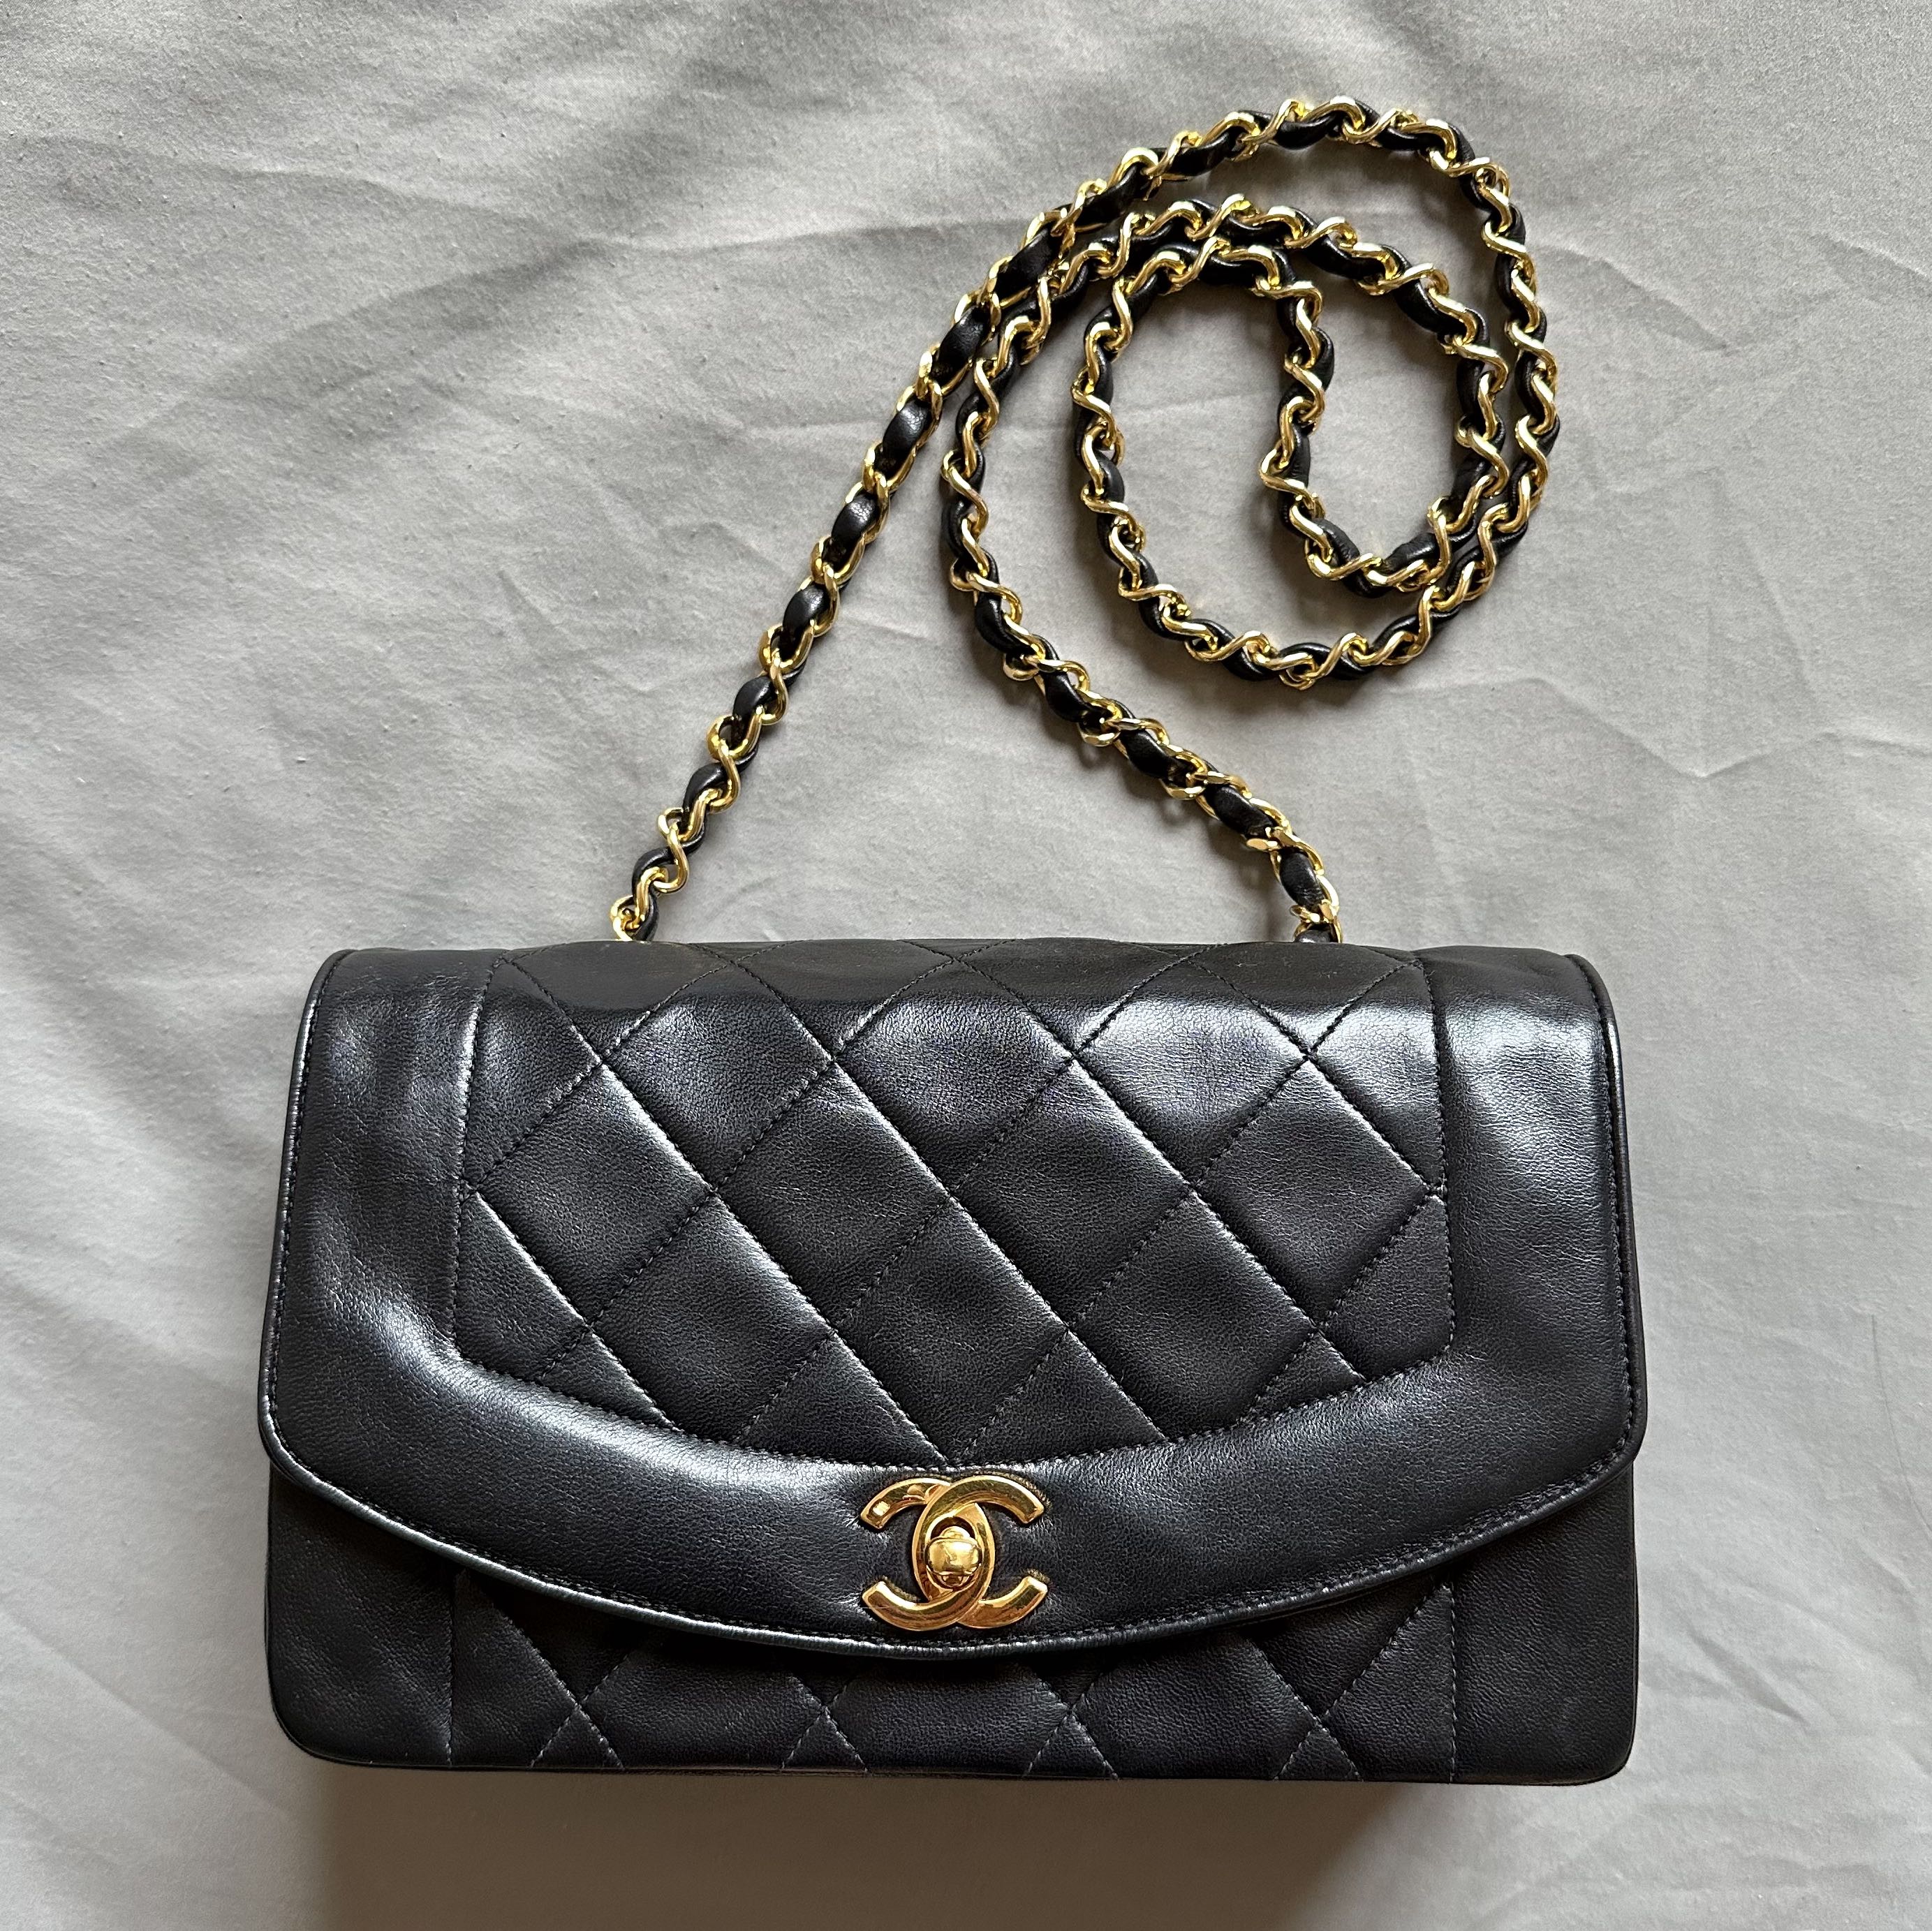 BAG REVIEW VINTAGE CHANEL SMALL DIANA FLAP  ALYSSA LENORE  YouTube